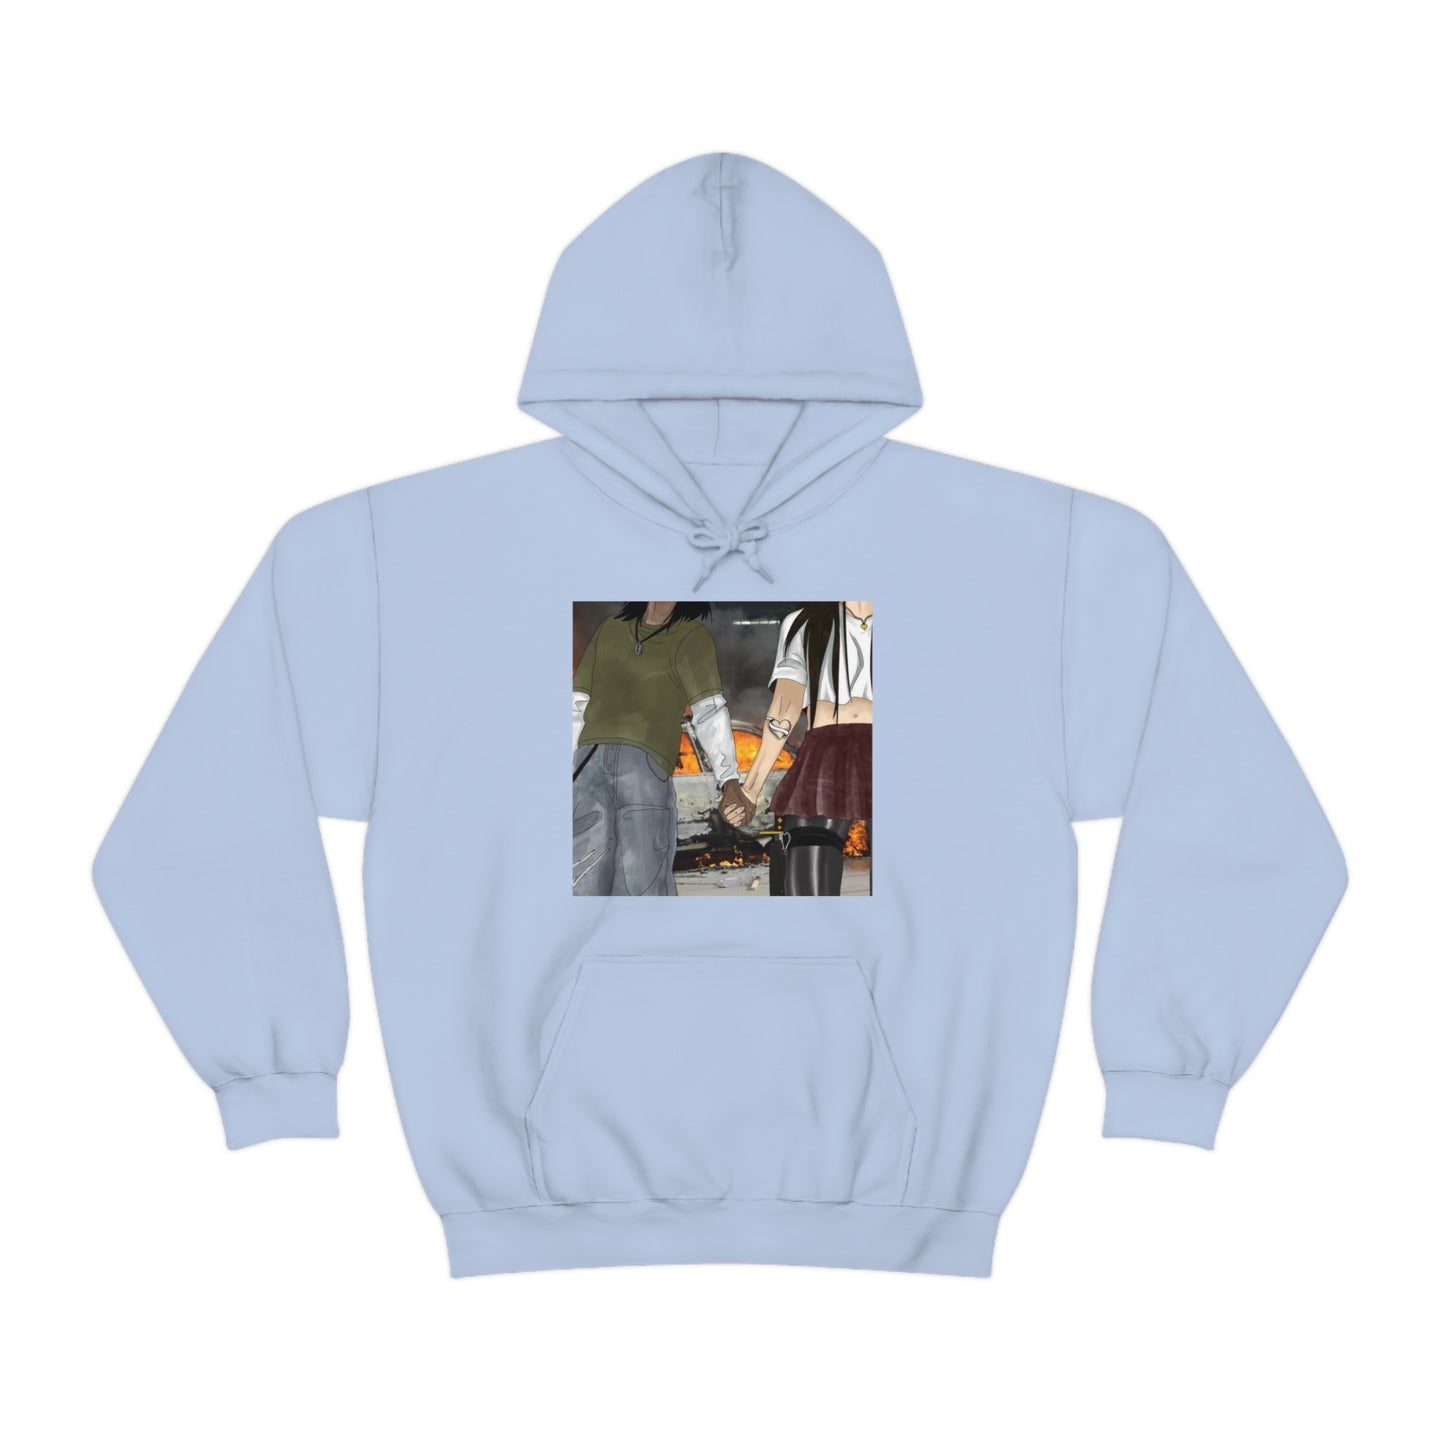 “Through hell and back” Hooded Sweatshirt